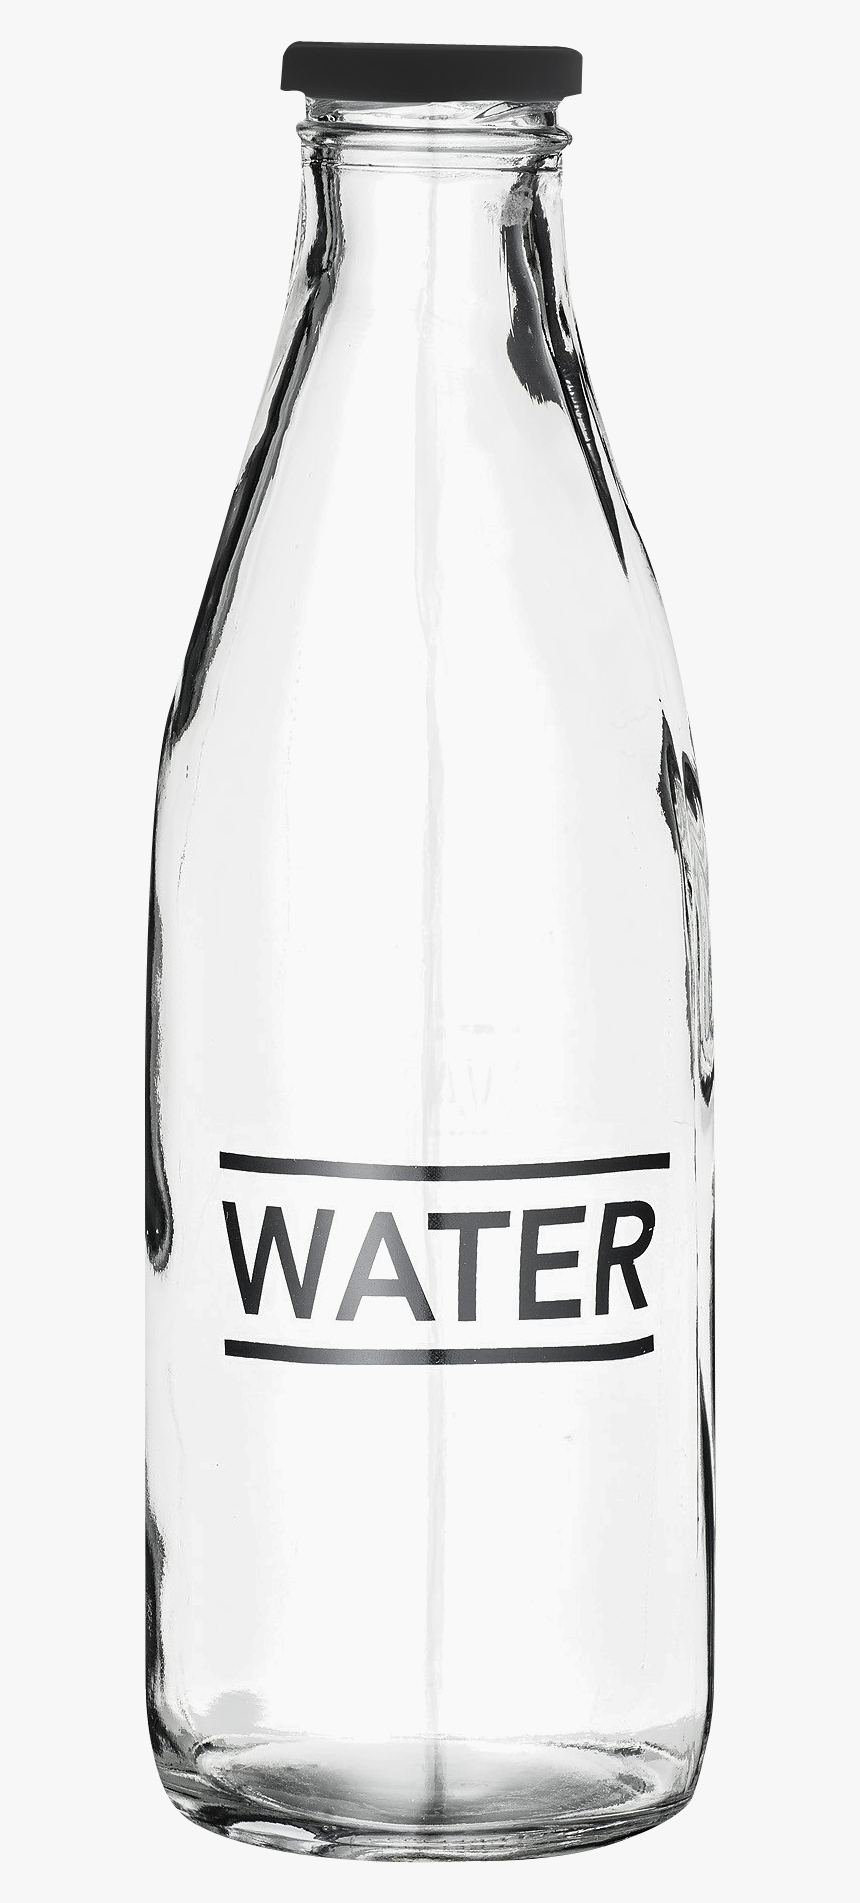 Glass Water Bottle Png Image, Transparent Png, Free Download